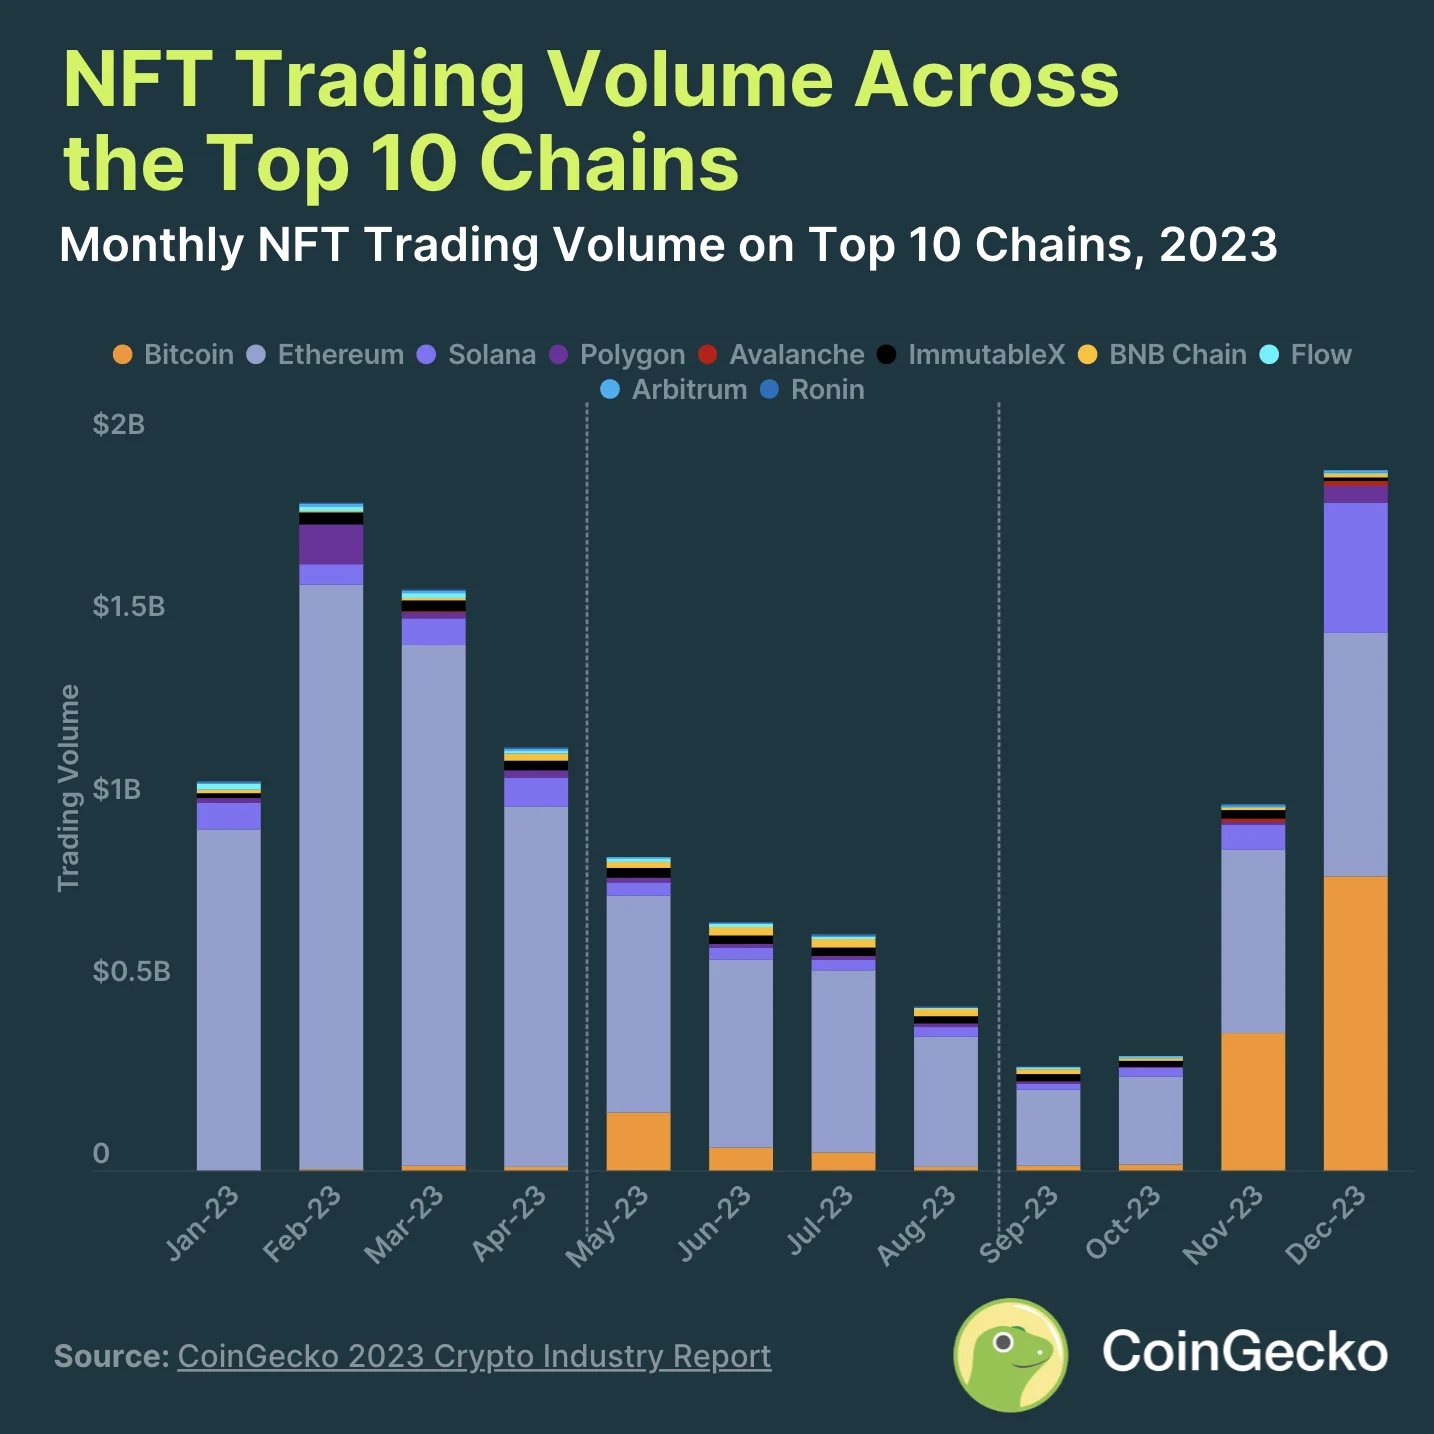 NFT Trading Volume Across the Top 10 Chains